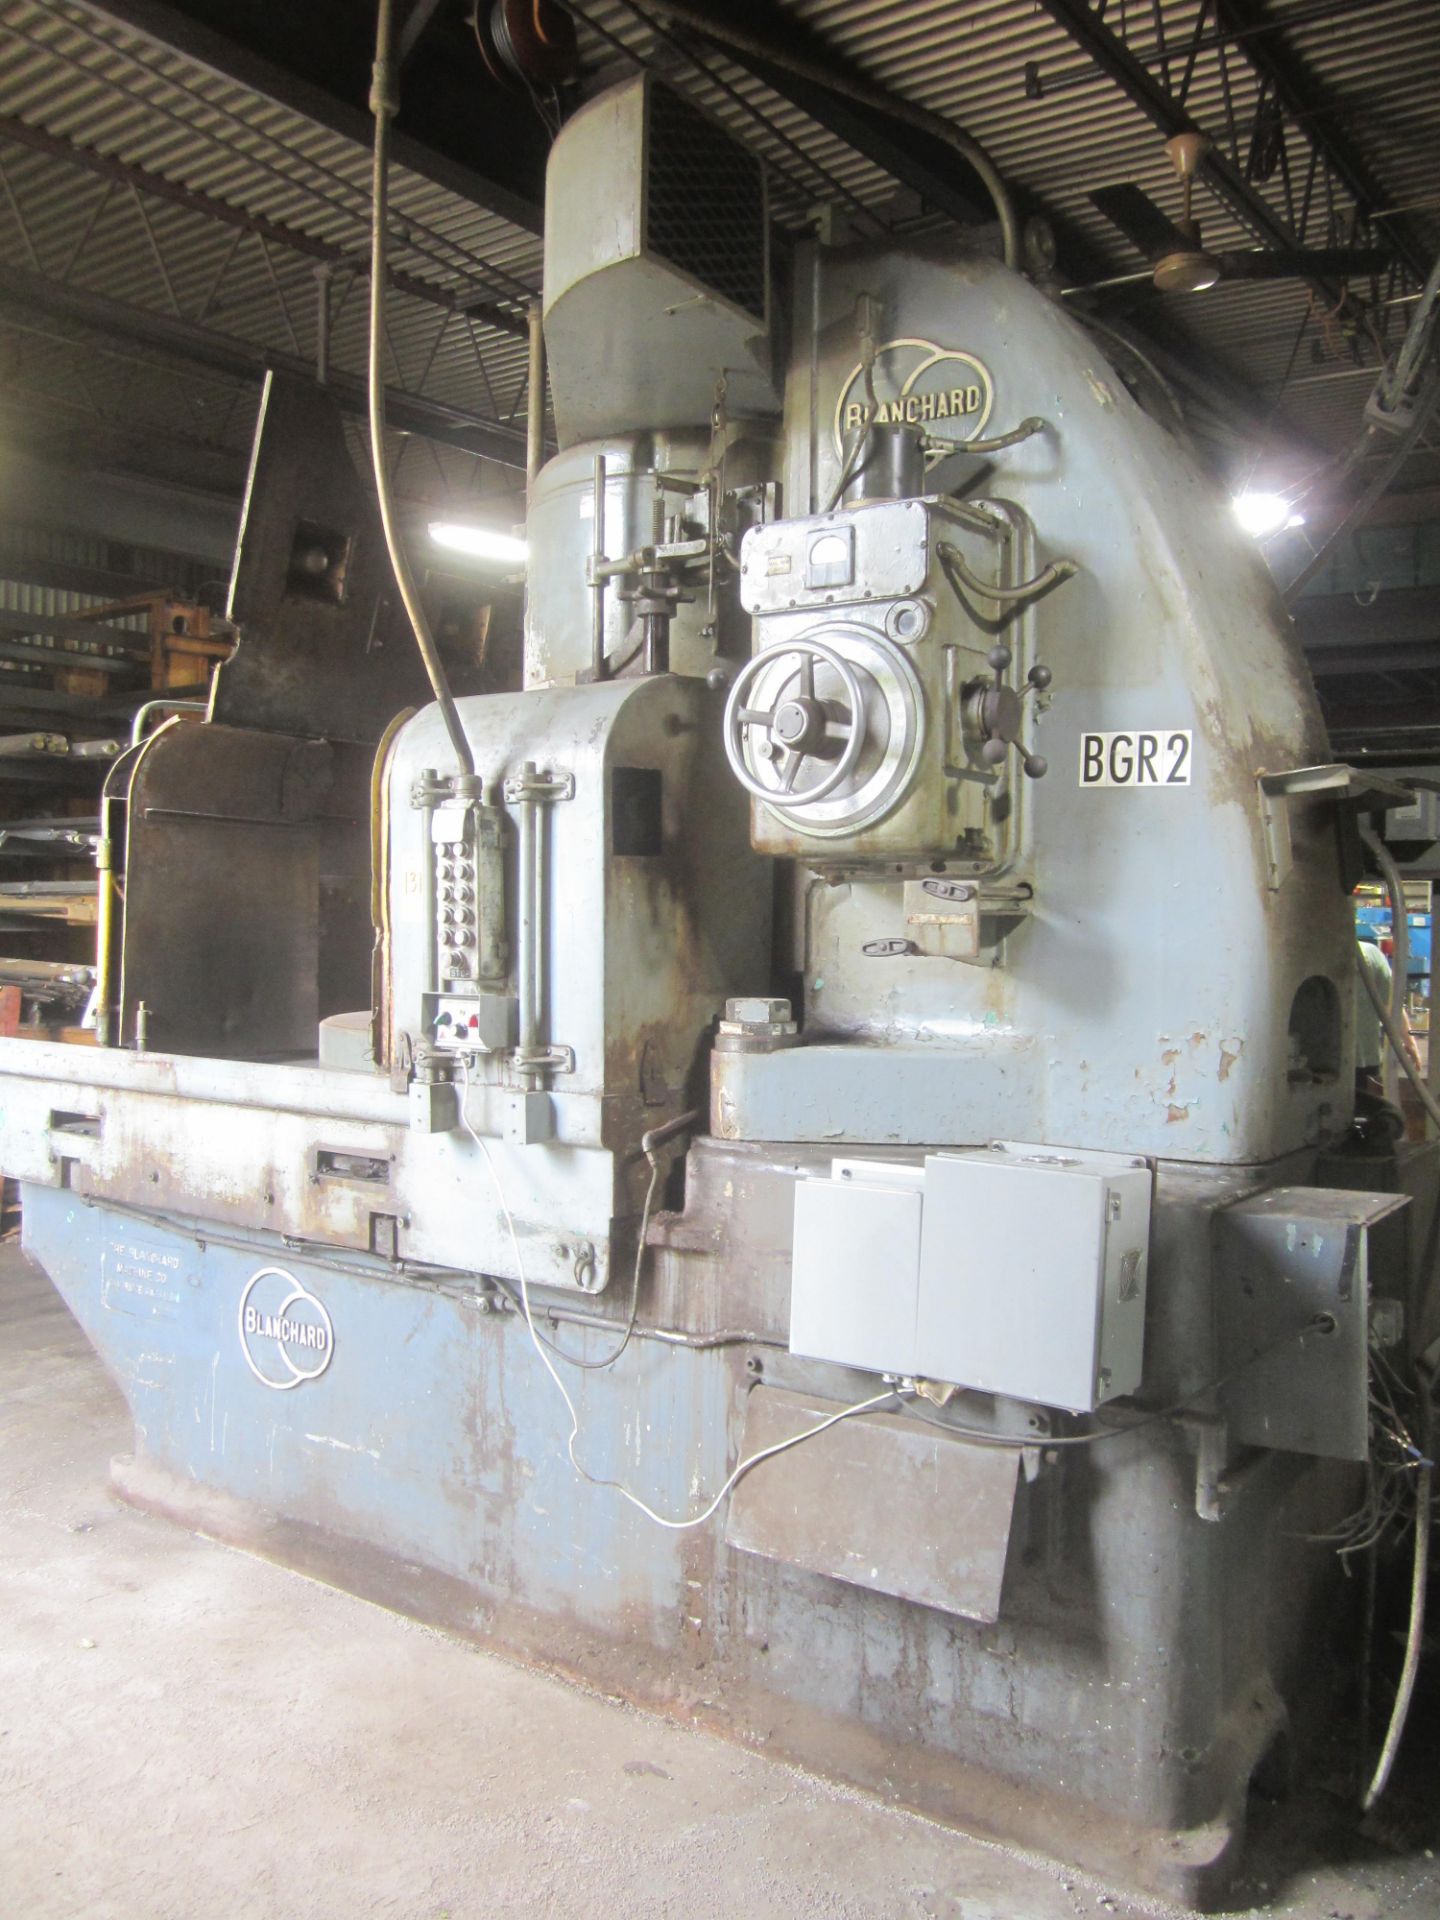 Blanchard 48" Rotary Surface Grinder, s/n 9802, 24" Segmented Wheel, Magnetic Chuck Recently Rebuilt - Image 4 of 15